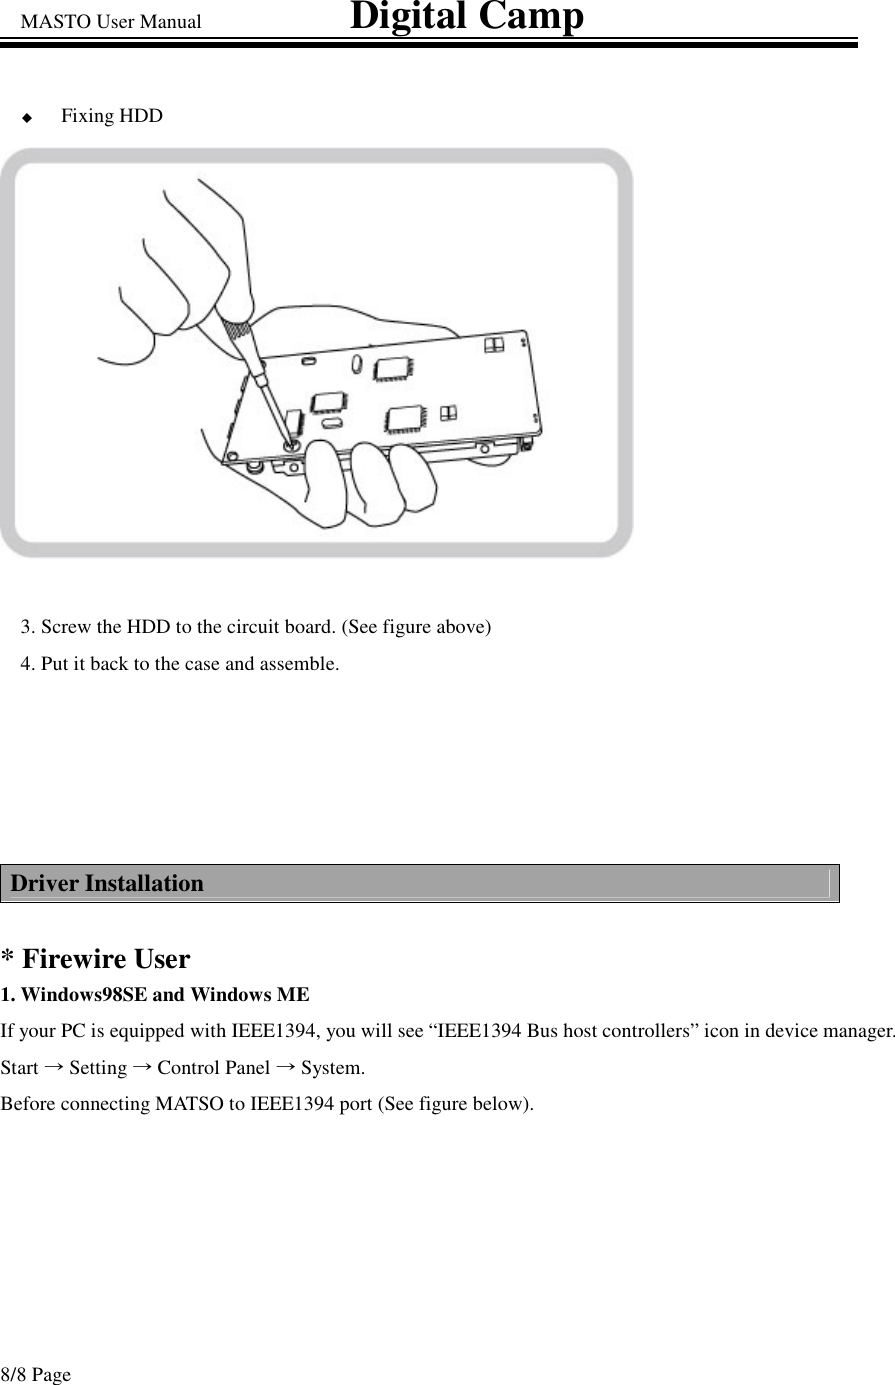 MASTO User Manual                             Digital Camp 8/8 Page Fixing HDD 3. Screw the HDD to the circuit board. (See figure above) 4. Put it back to the case and assemble.  Driver Installation  * Firewire User 1. Windows98SE and Windows ME  If your PC is equipped with IEEE1394, you will see “IEEE1394 Bus host controllers” icon in device manager. Start Setting Control Panel System.     Before connecting MATSO to IEEE1394 port (See figure below).  